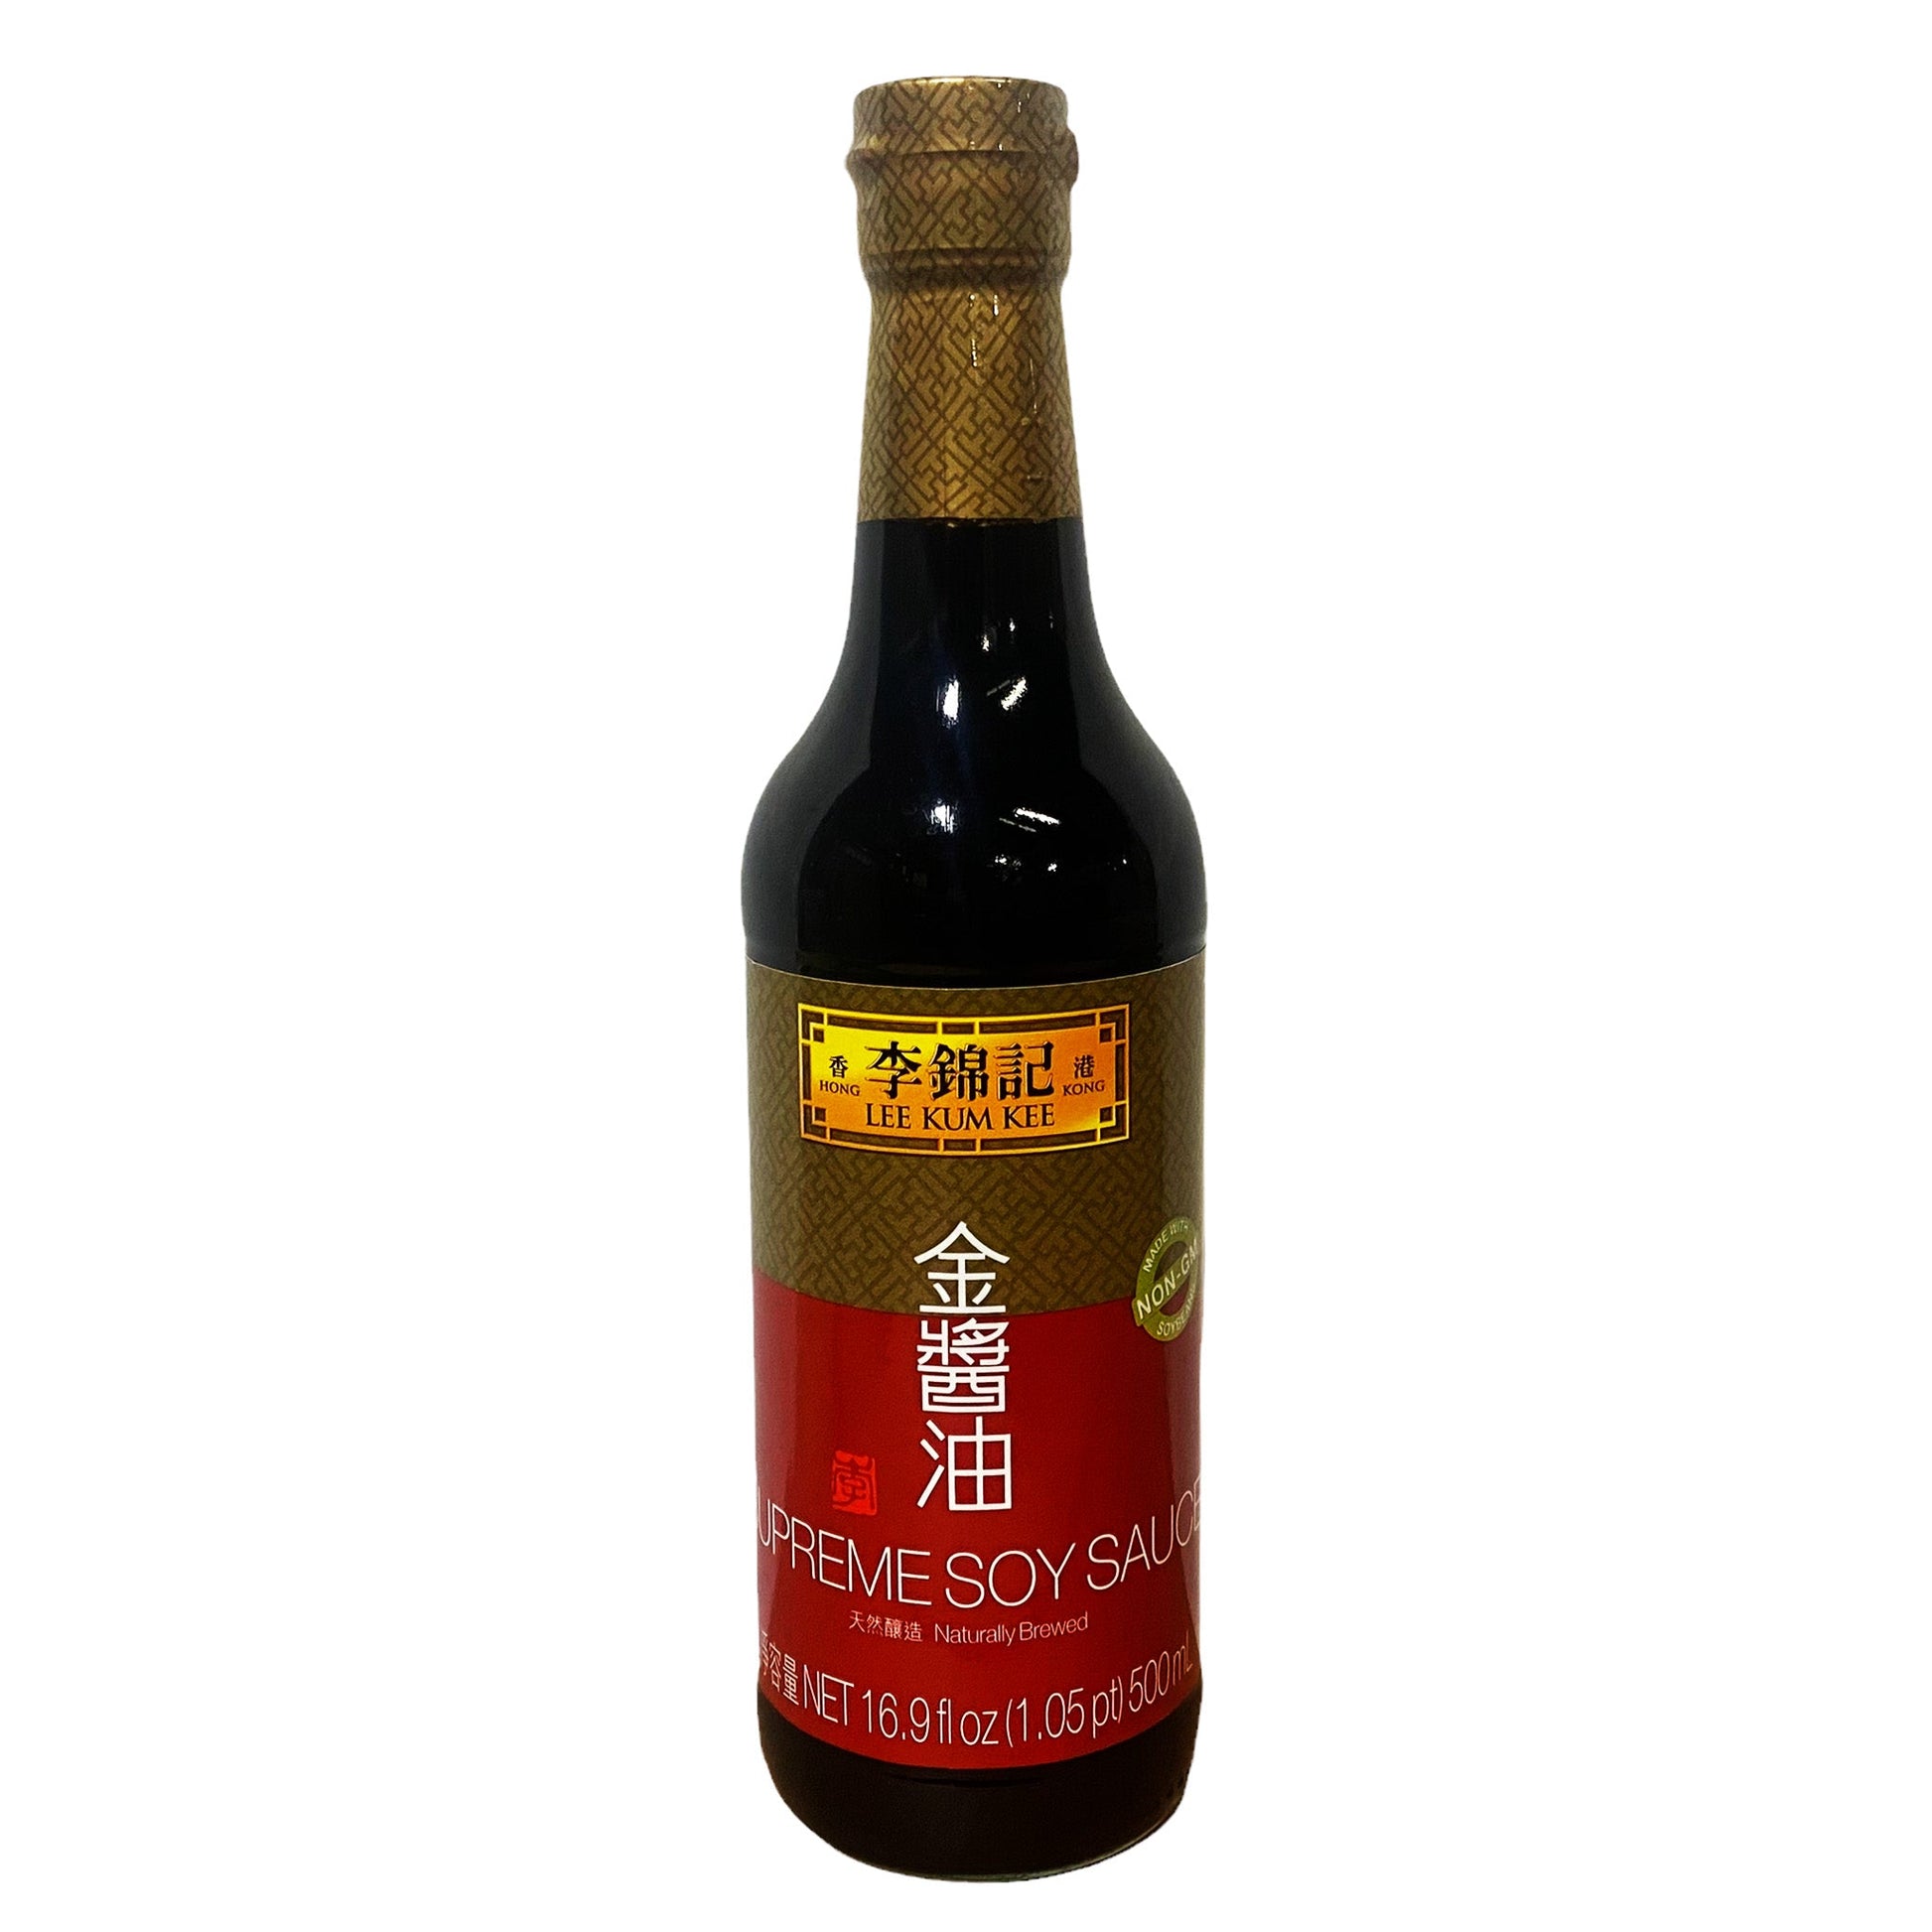 Front graphic image of Lee Kum Kee Supreme Soy Sauce 16.9oz - 李锦记 金酱油 16.9oz